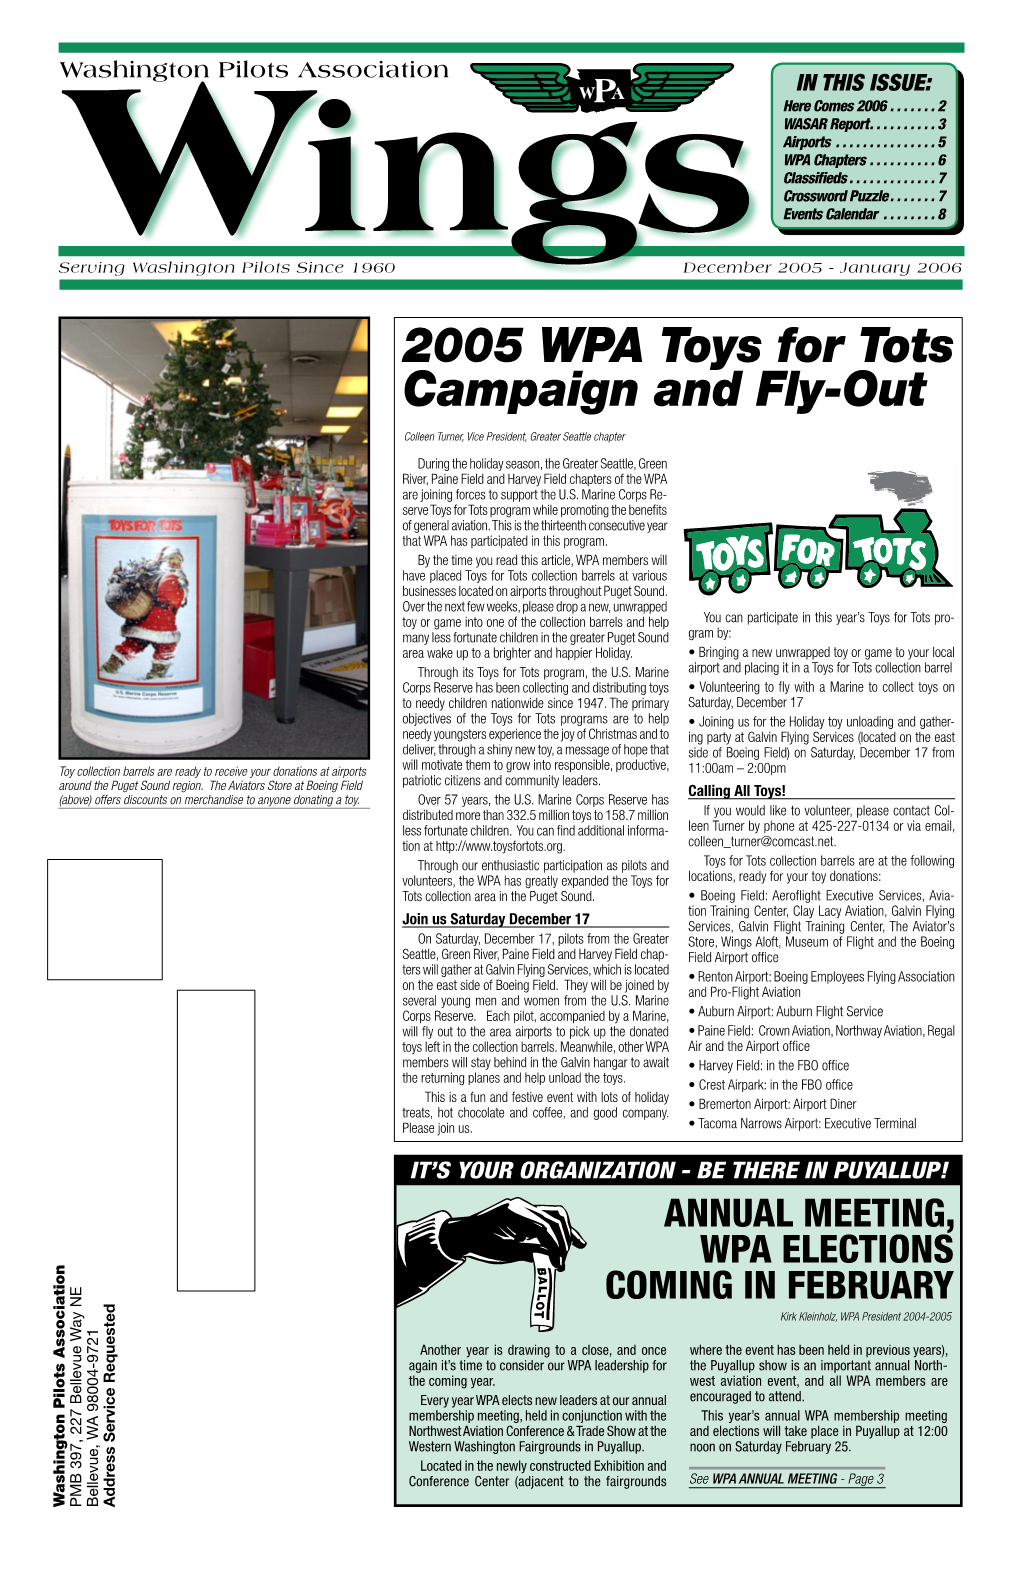 2005 WPA Toys for Tots Campaign and Fly-Out